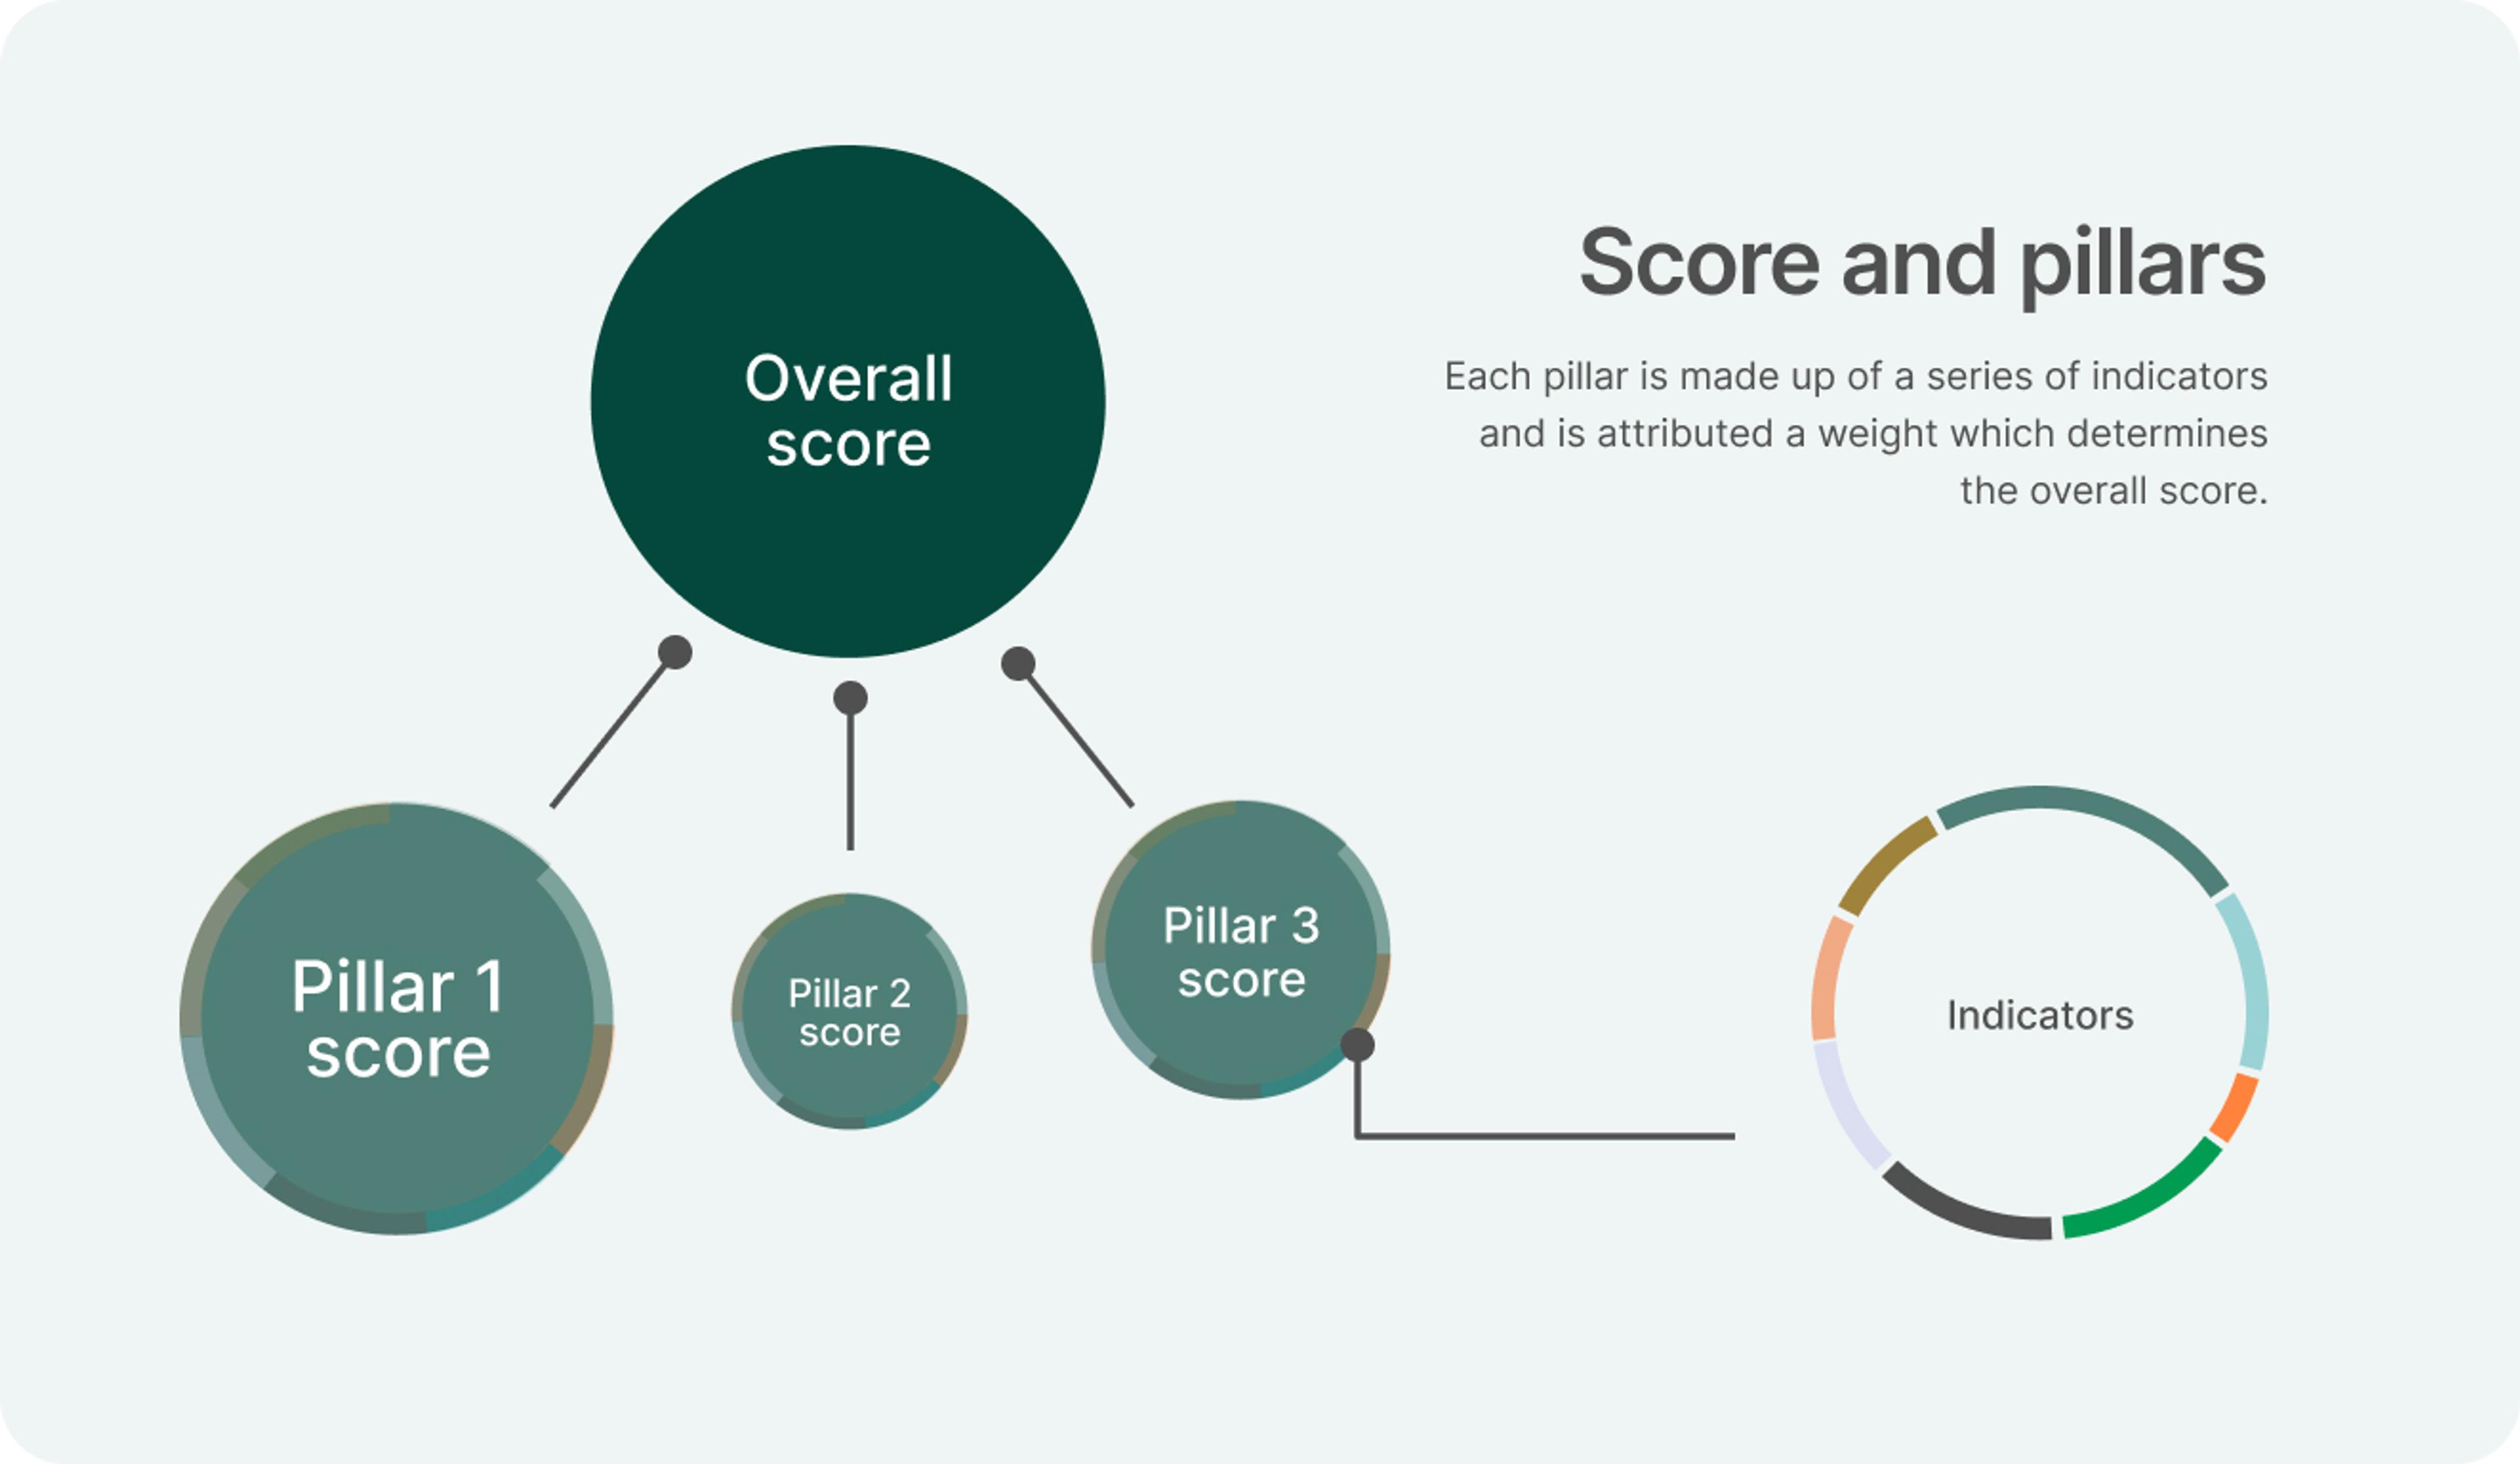 A visual representation of how the VCM Investment Attractiveness Index Methodology's scoring system works